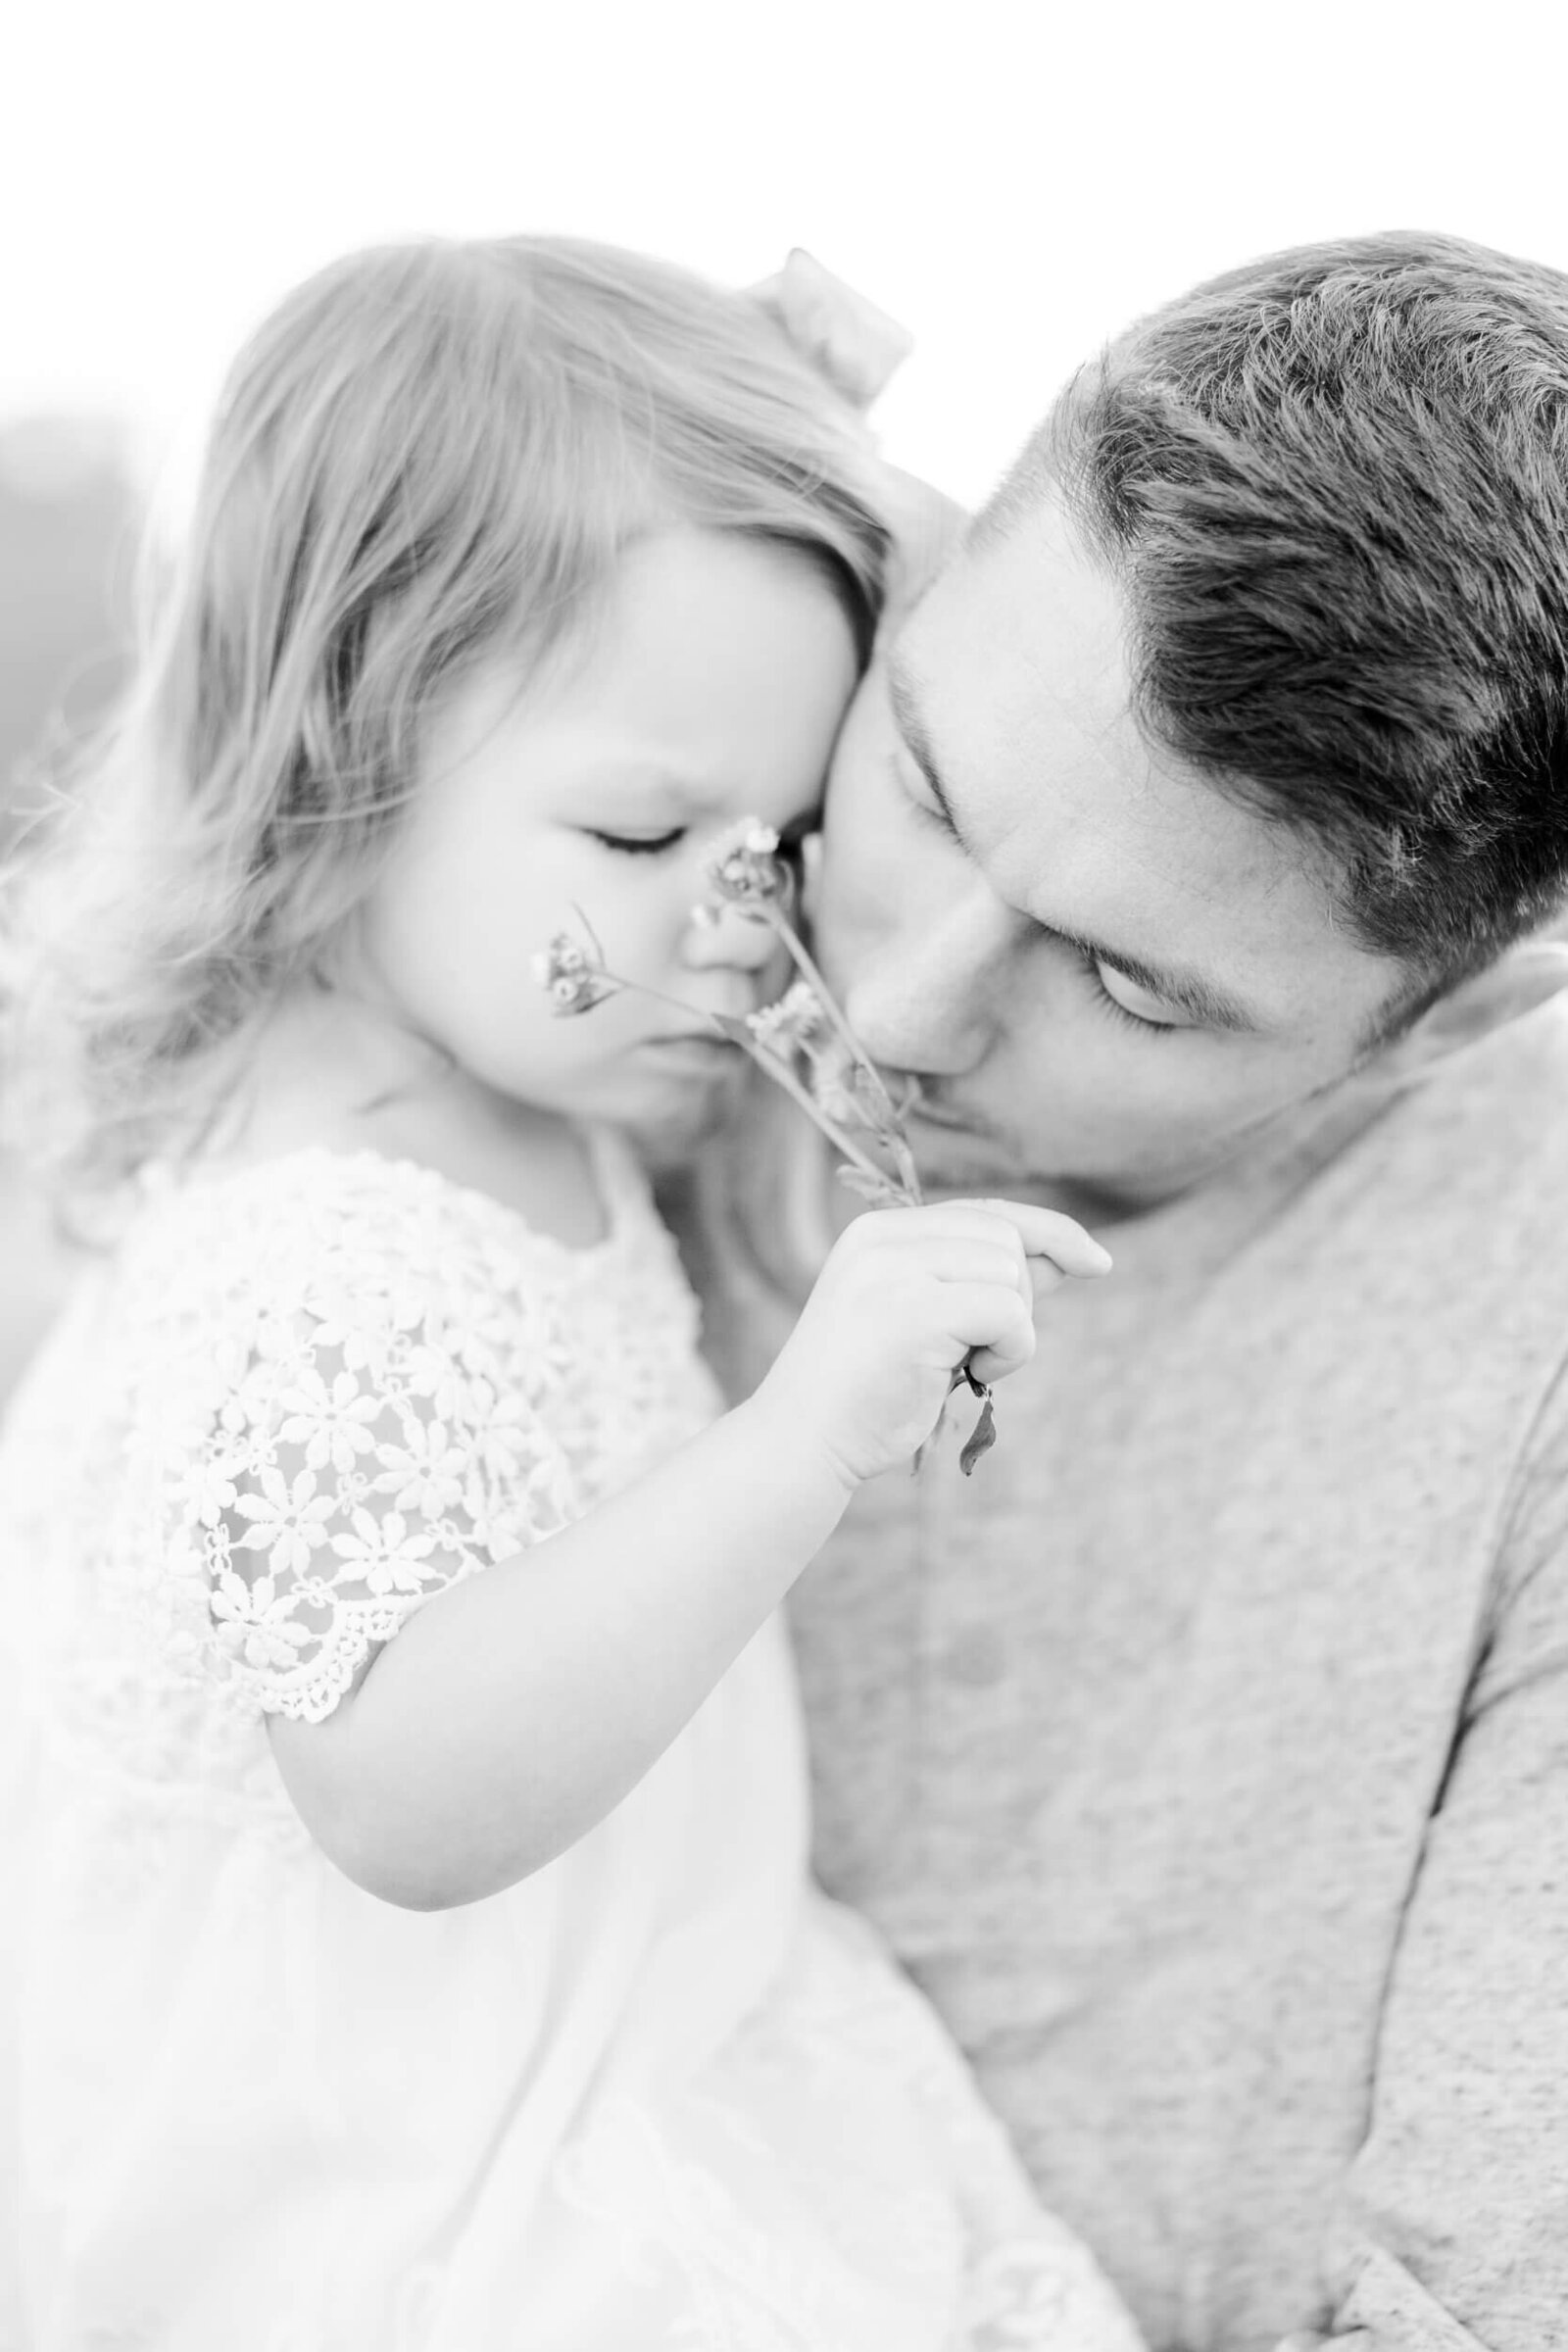 Black and white, dad holds his little girl and they smell a flower together